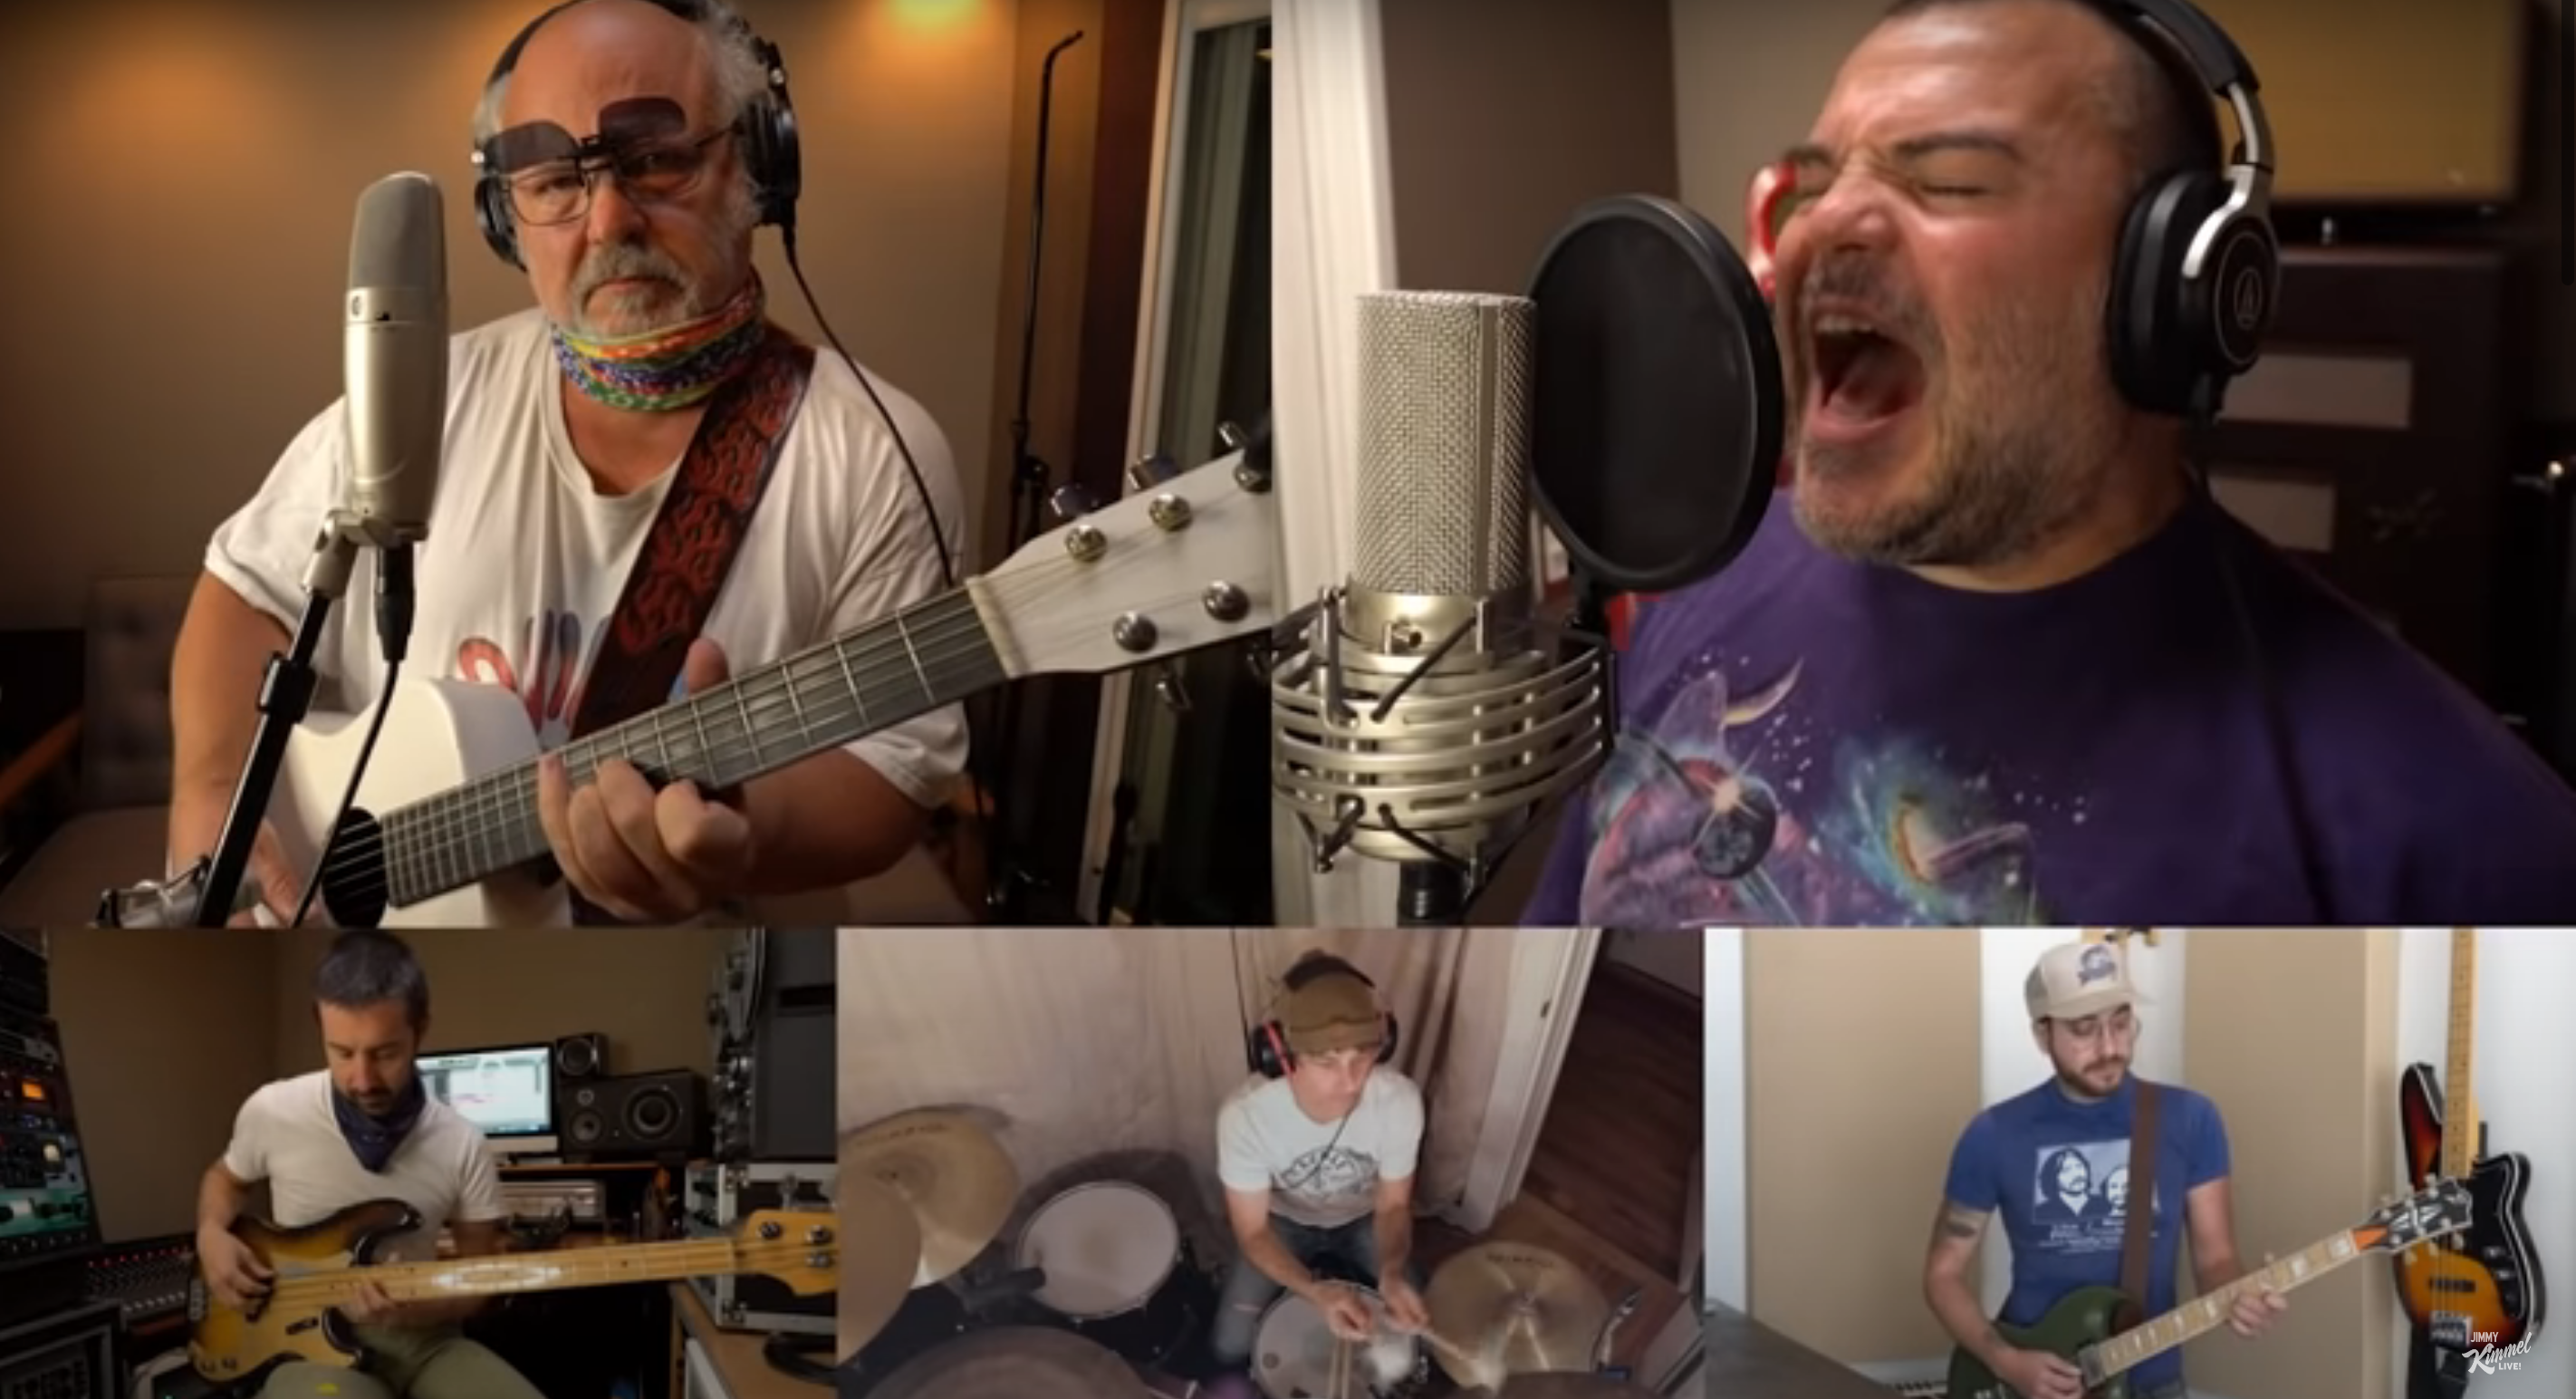 Tenacious D Release First Original Song in Five Years